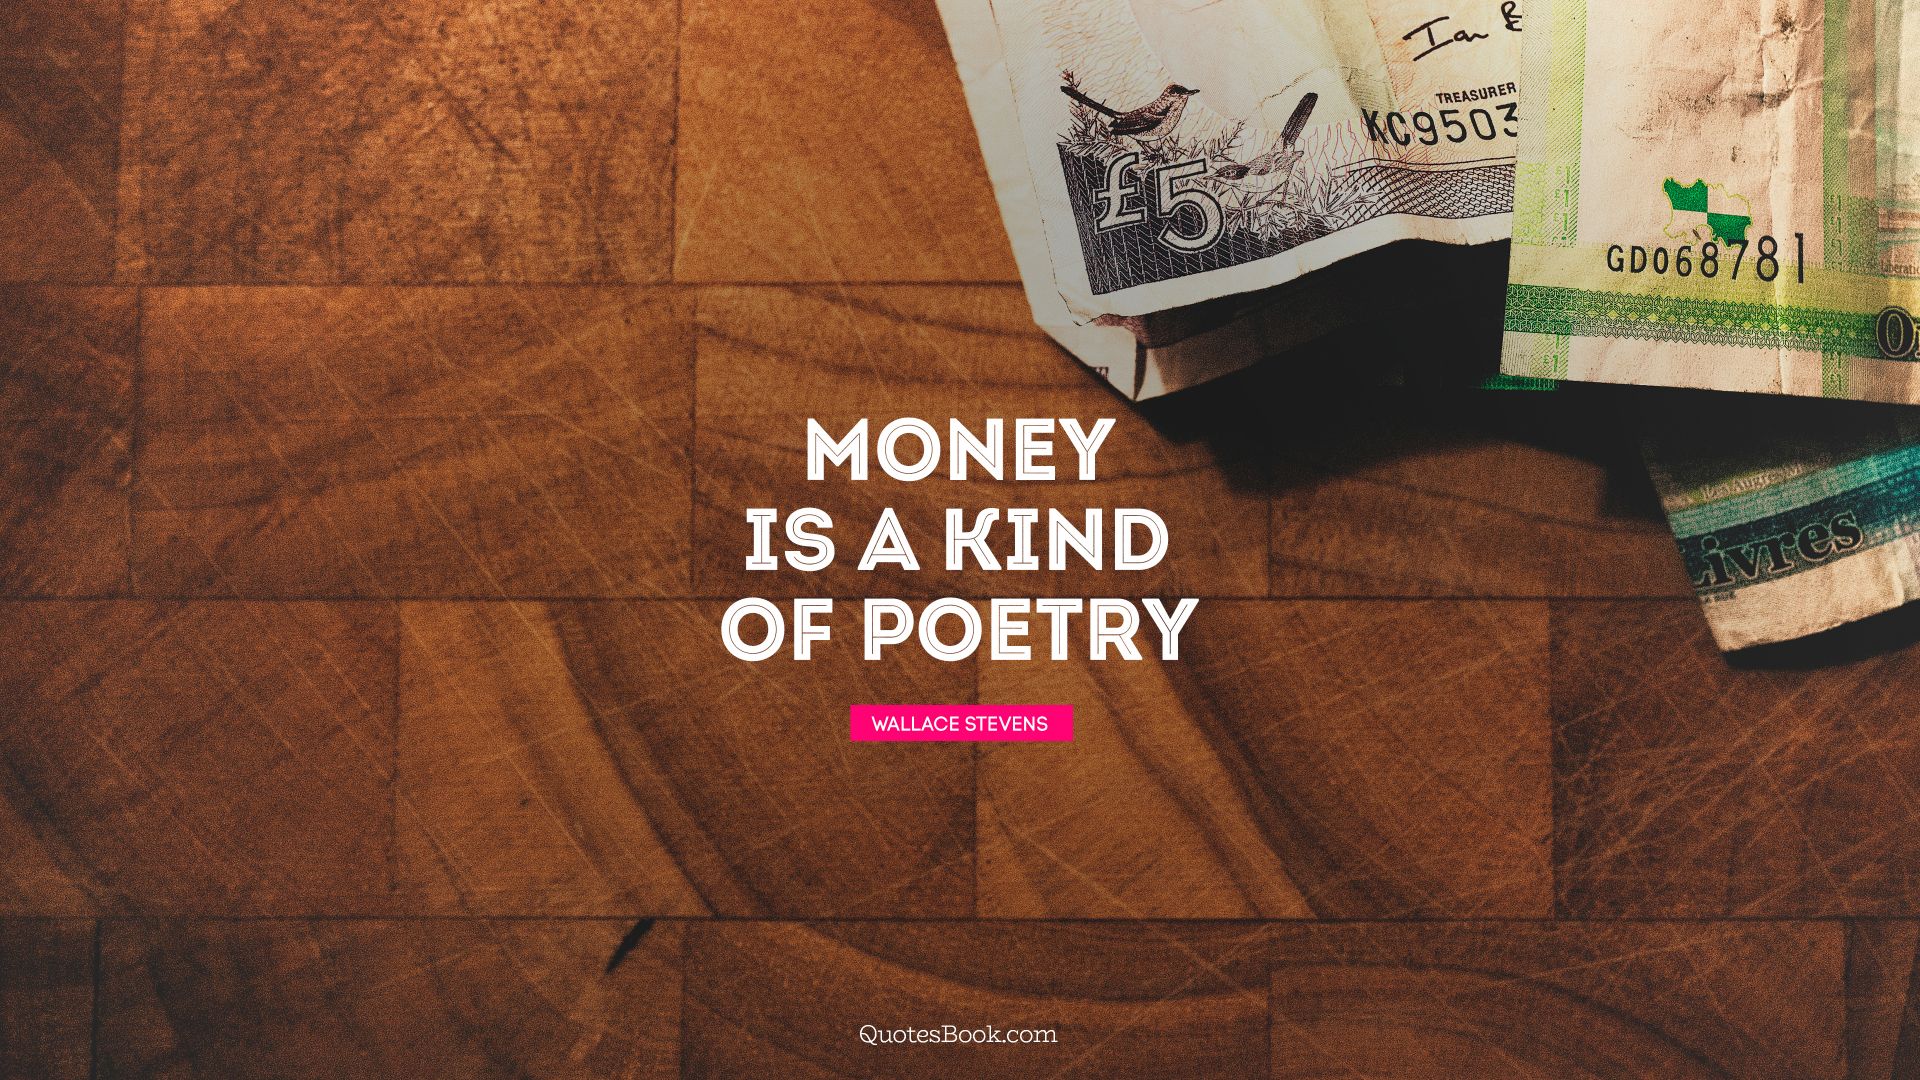 Money is a kind of poetry. - Quote by Wallace Stevens